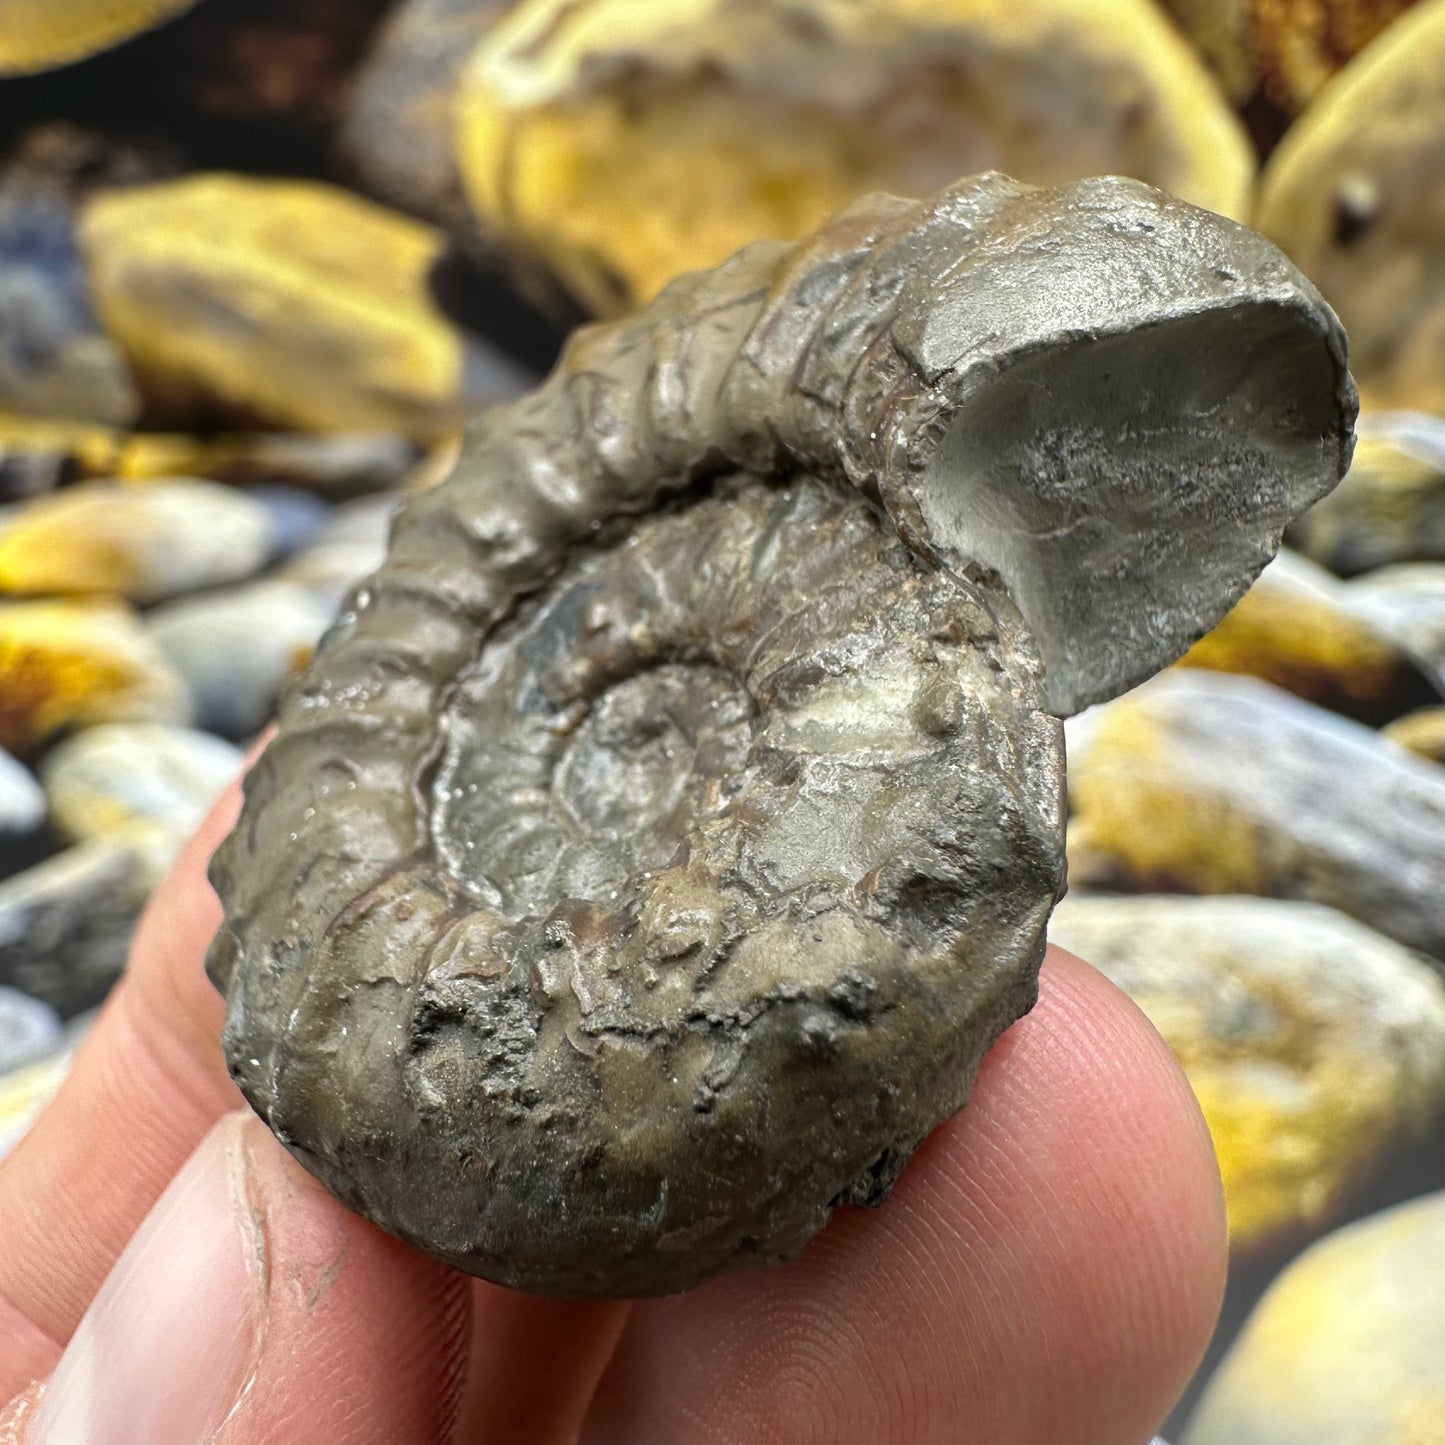 Agassiceras sp. ammonite fossil - Whitby, North Yorkshire